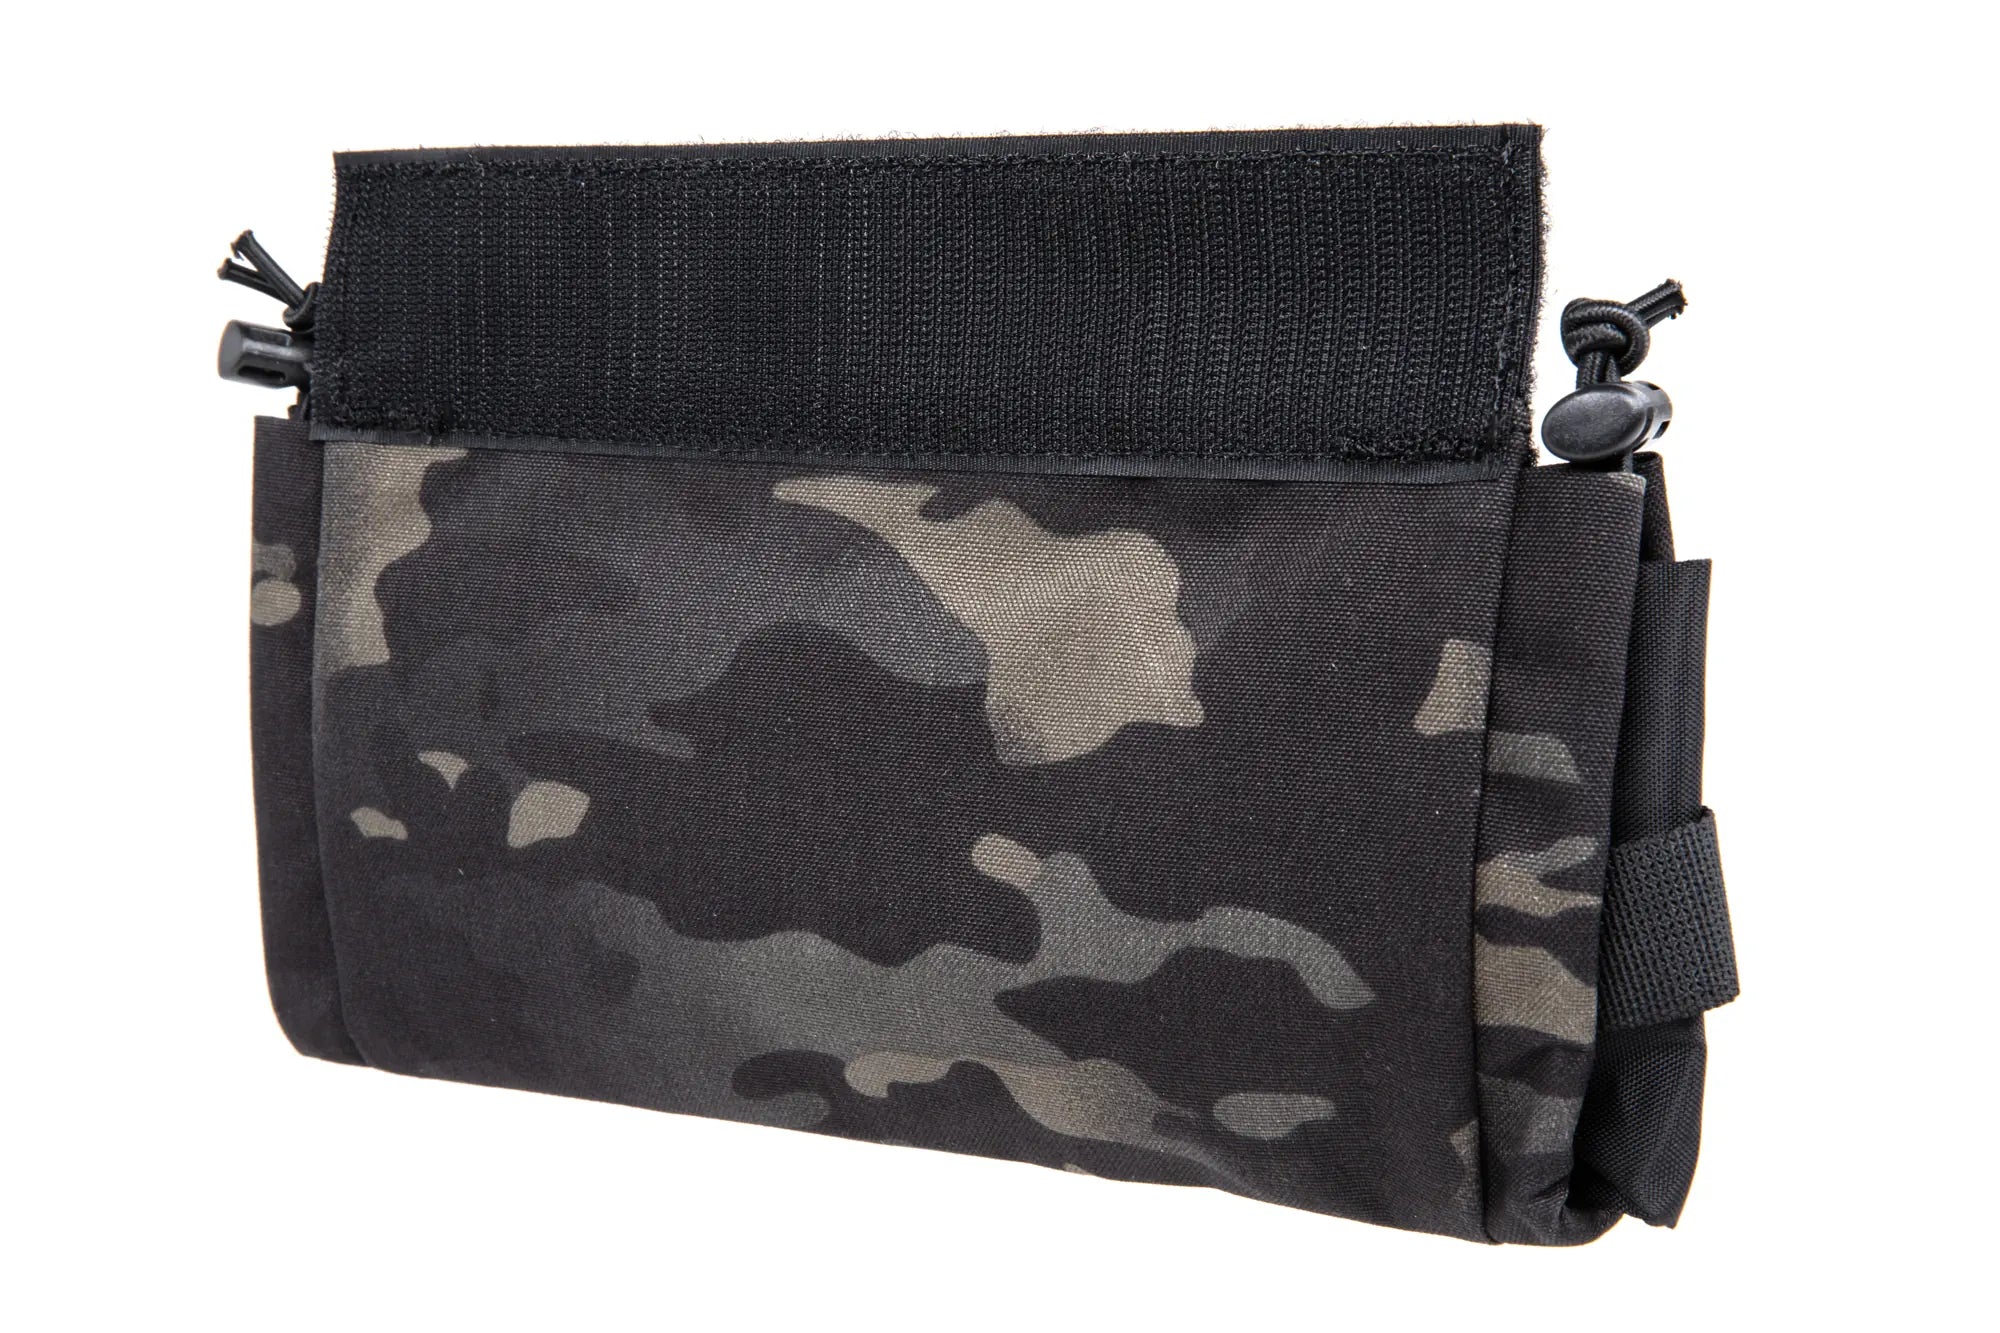 Tactical first aid kit with sleeve Wosport MultiCam Black-2